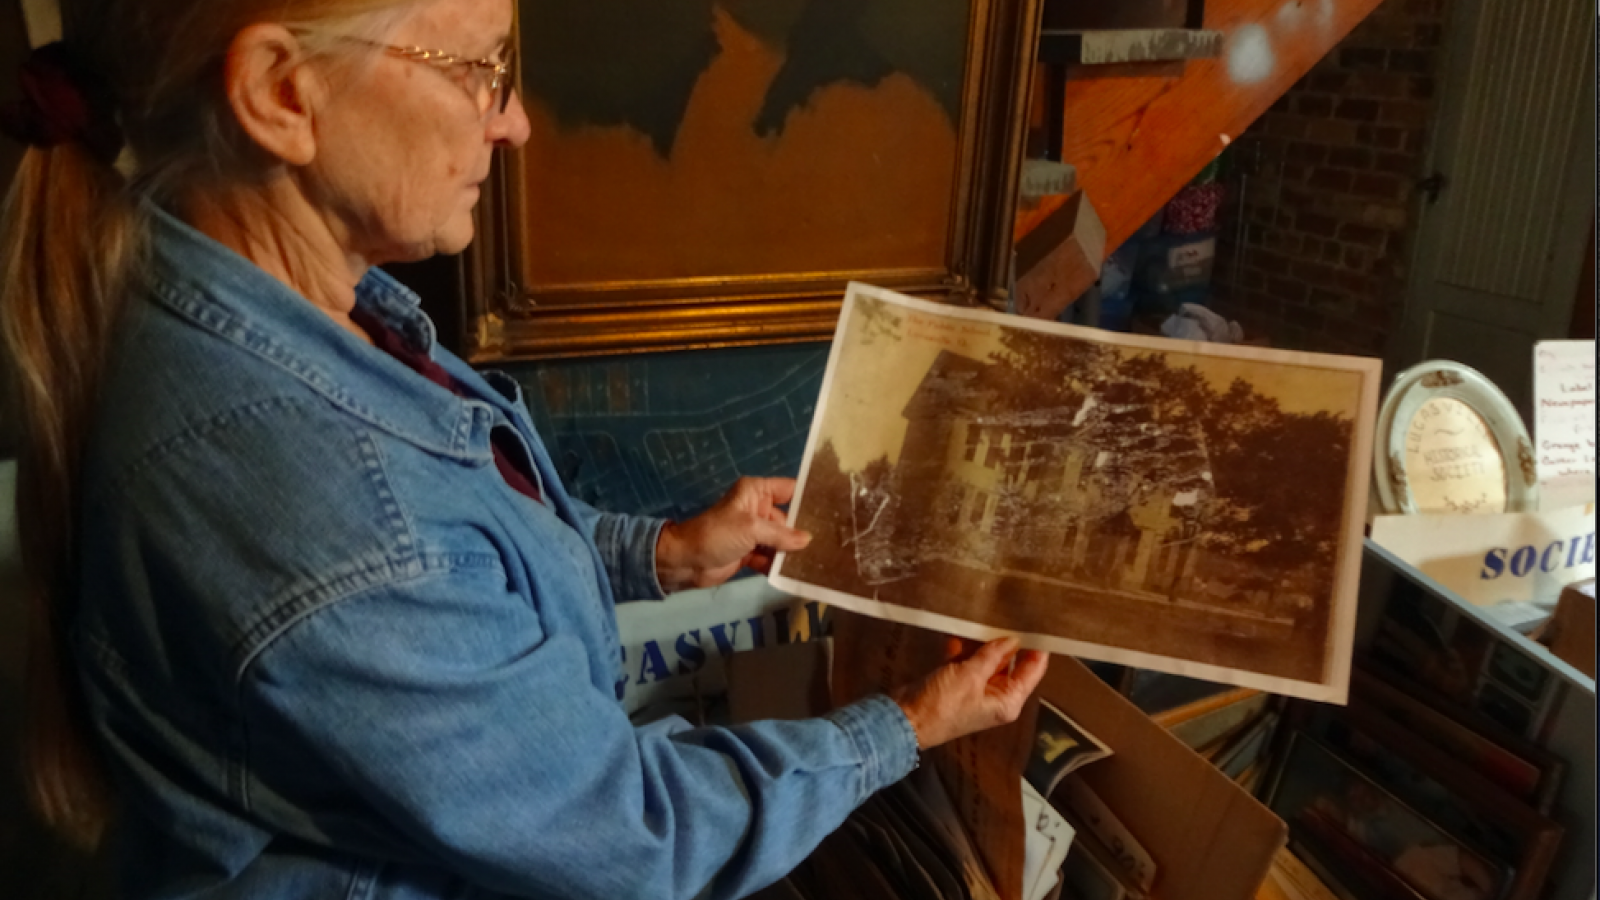 Pat Smith holding up an old image of the Emmanuel United Methodist Church.